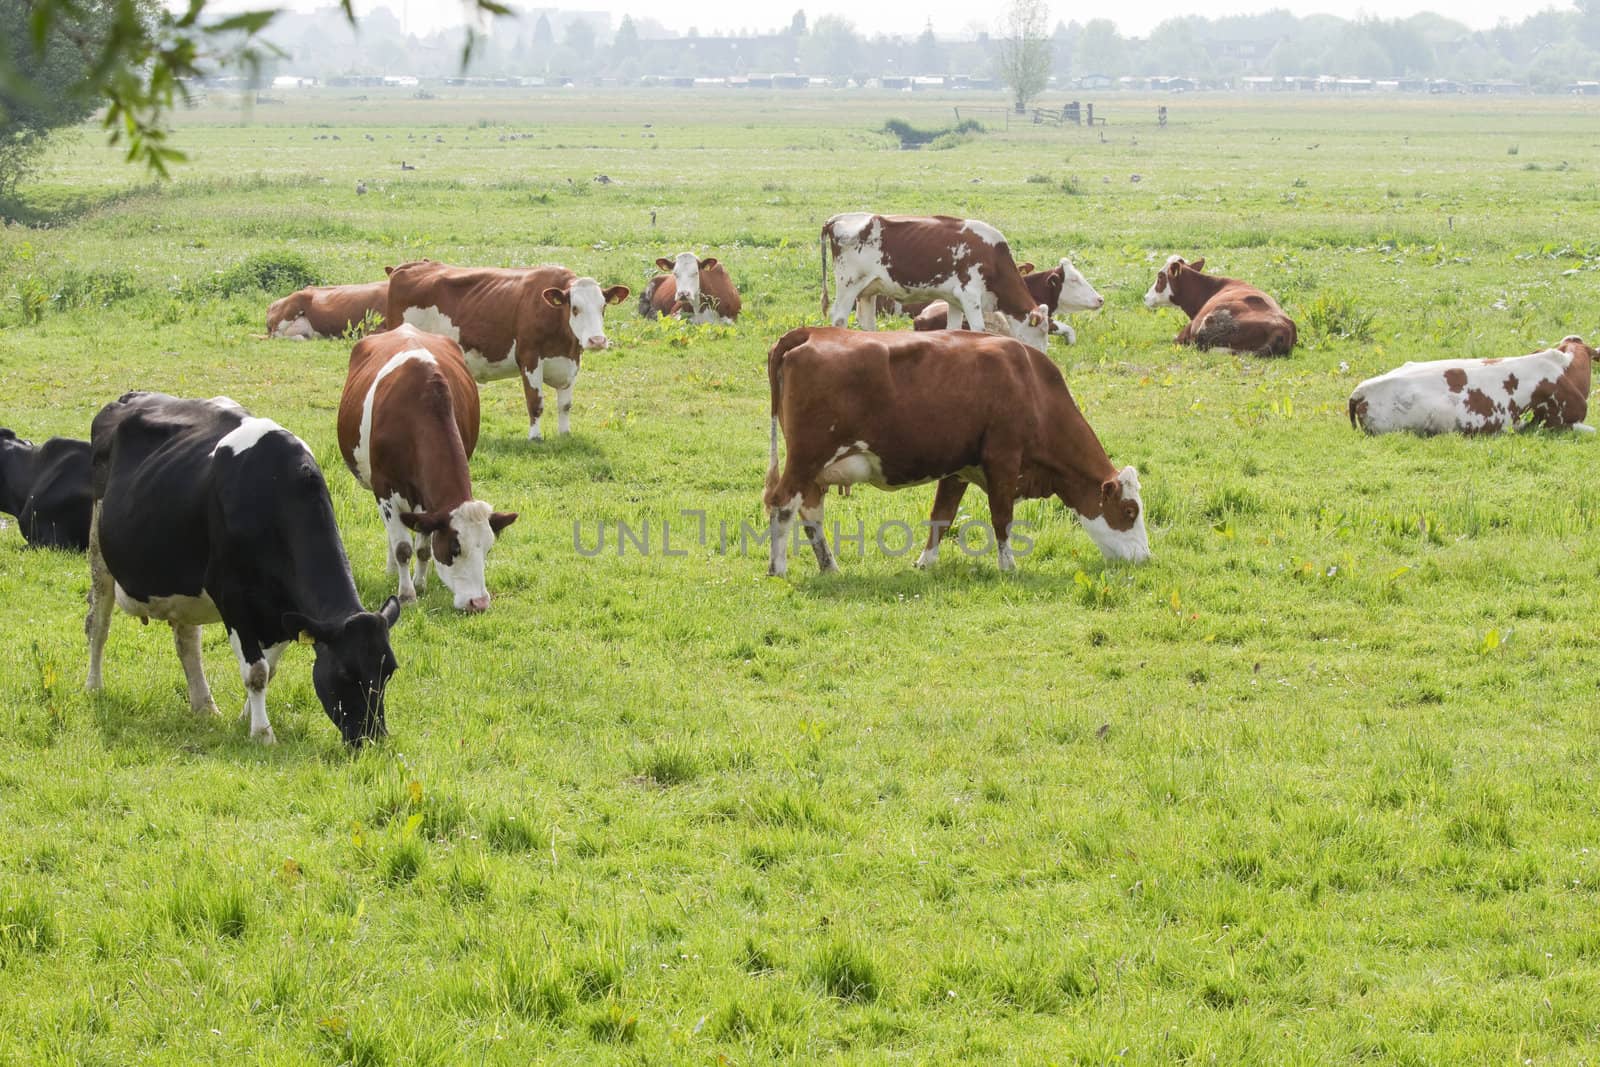 Grazing cows in Dutch country landscape by Colette